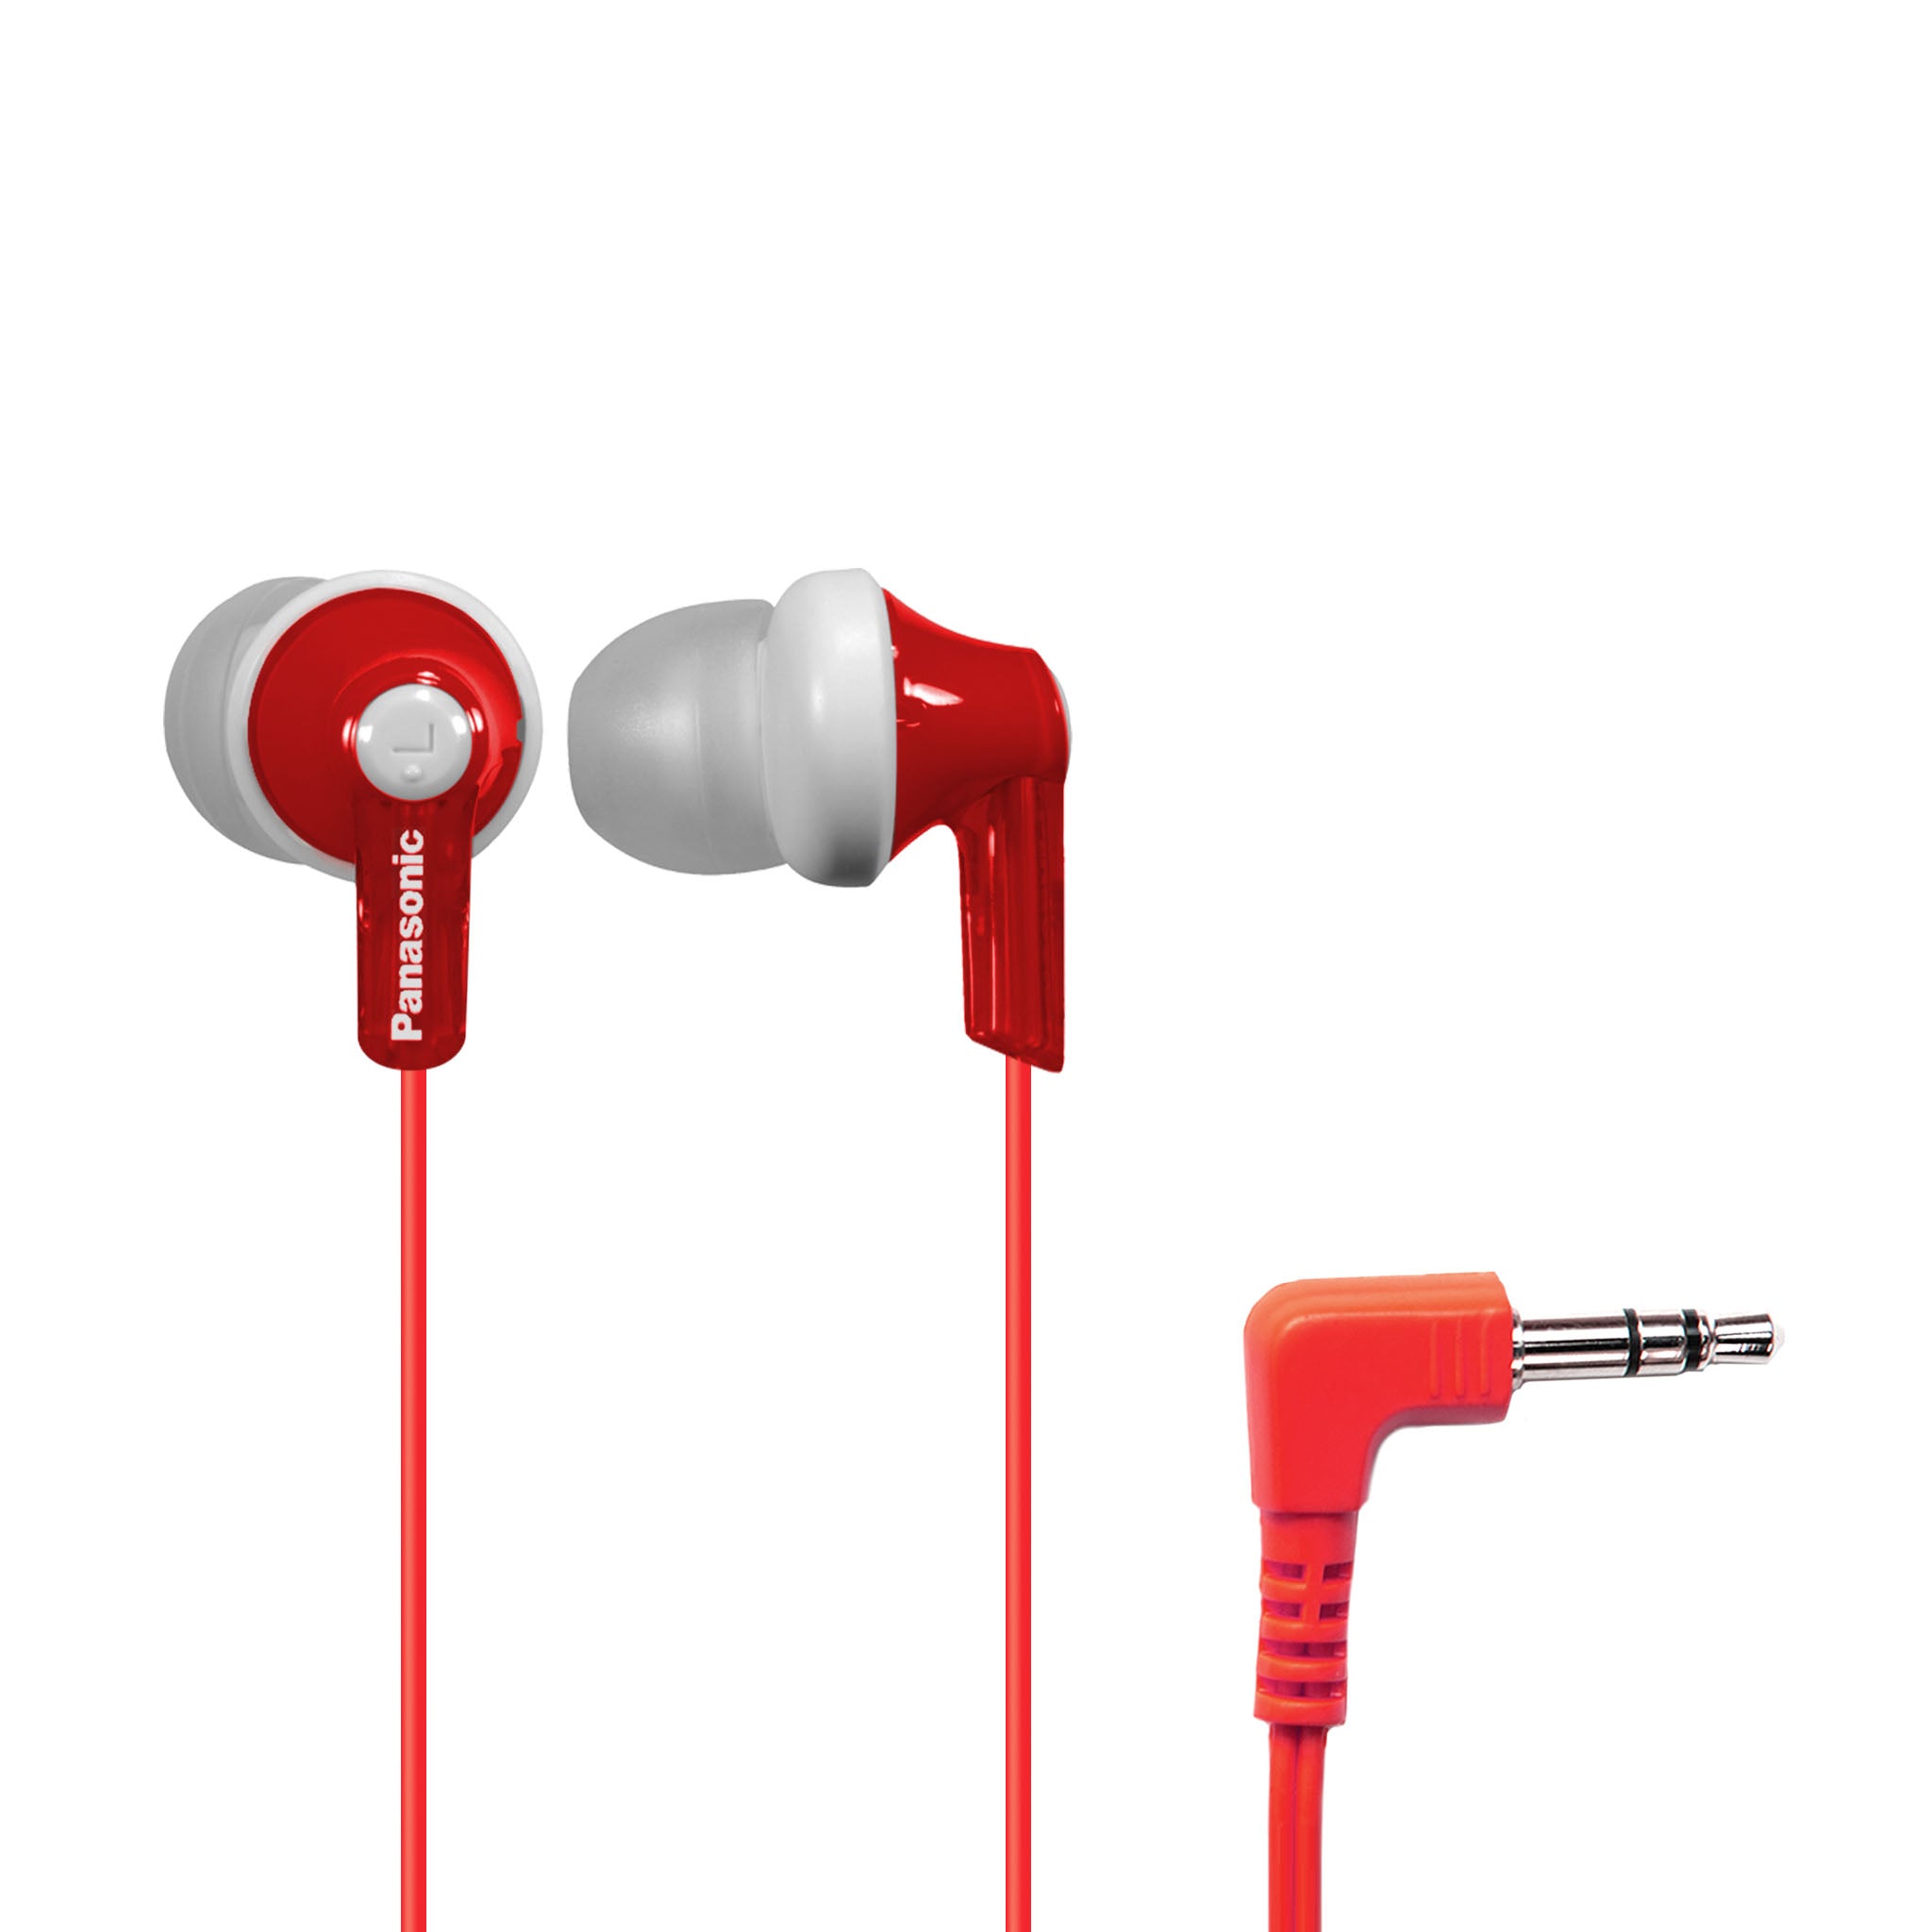 Panasonic ErgoFit In-Ear Earbud Headphones RP-HJE120 Laptops Phones with 3.5mm - for and Jack